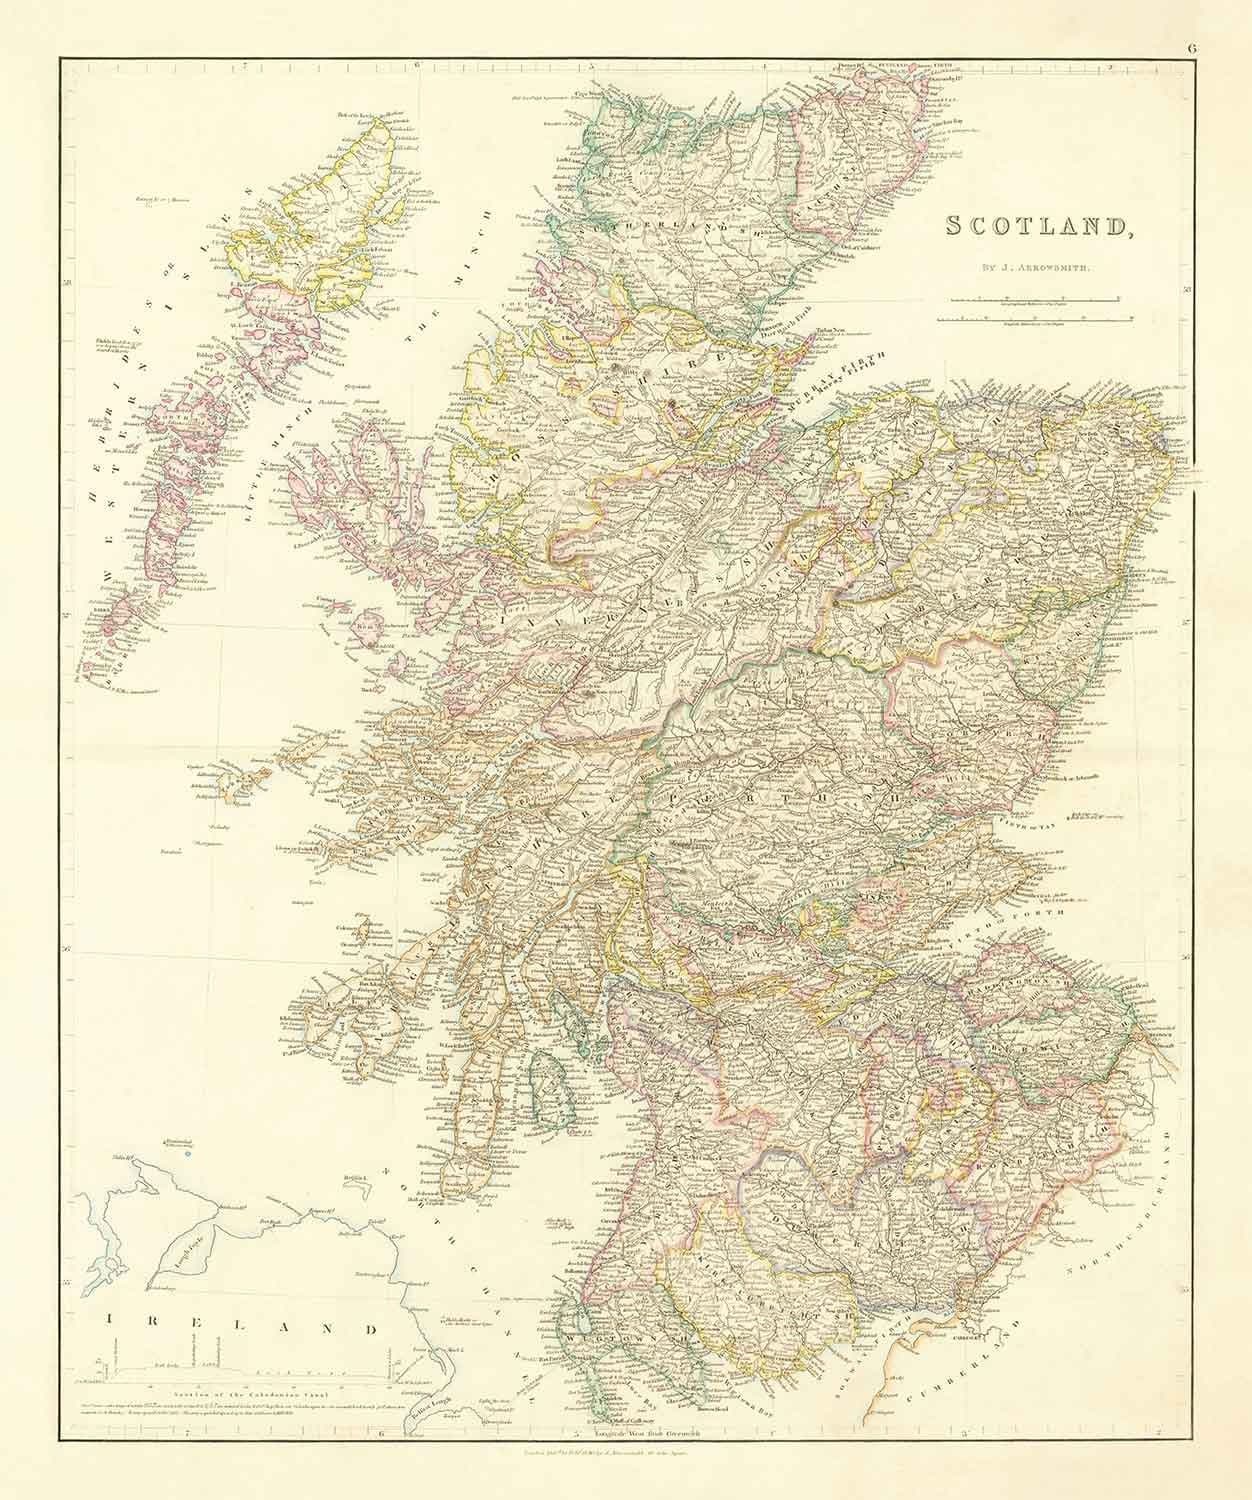 Old Map of Scotland, 1846 by Arrowsmith - Beautiful Handcoloured Victorian Atlas - Counties, Cities, Roads